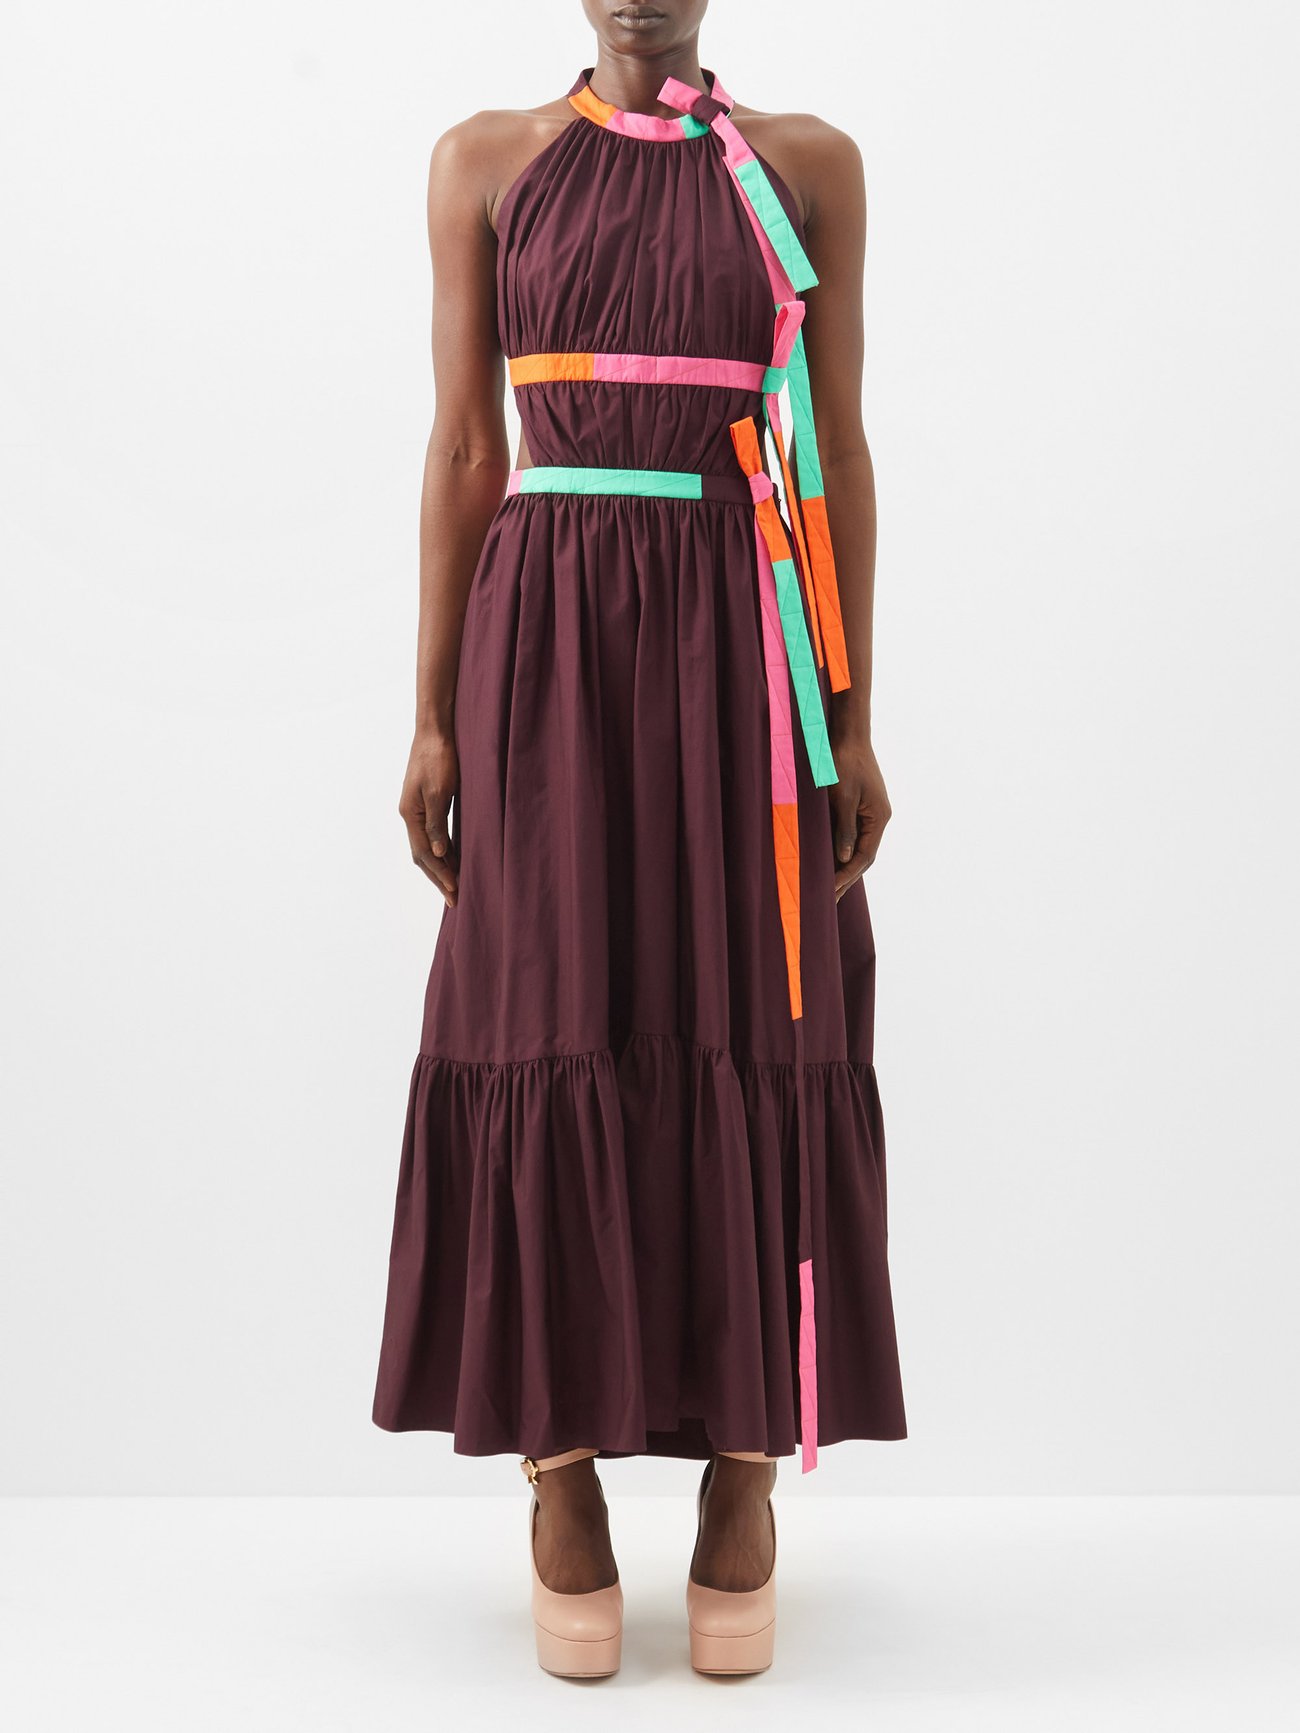 Roksanda’s aubergine-purple cotton Niesha dress features a back cutout and bright trims that form bows and waist-defining accents, adhering to the label’s colour-blocking vision. Lower back cut out and tie round high neck halterneck. Maxi length. 